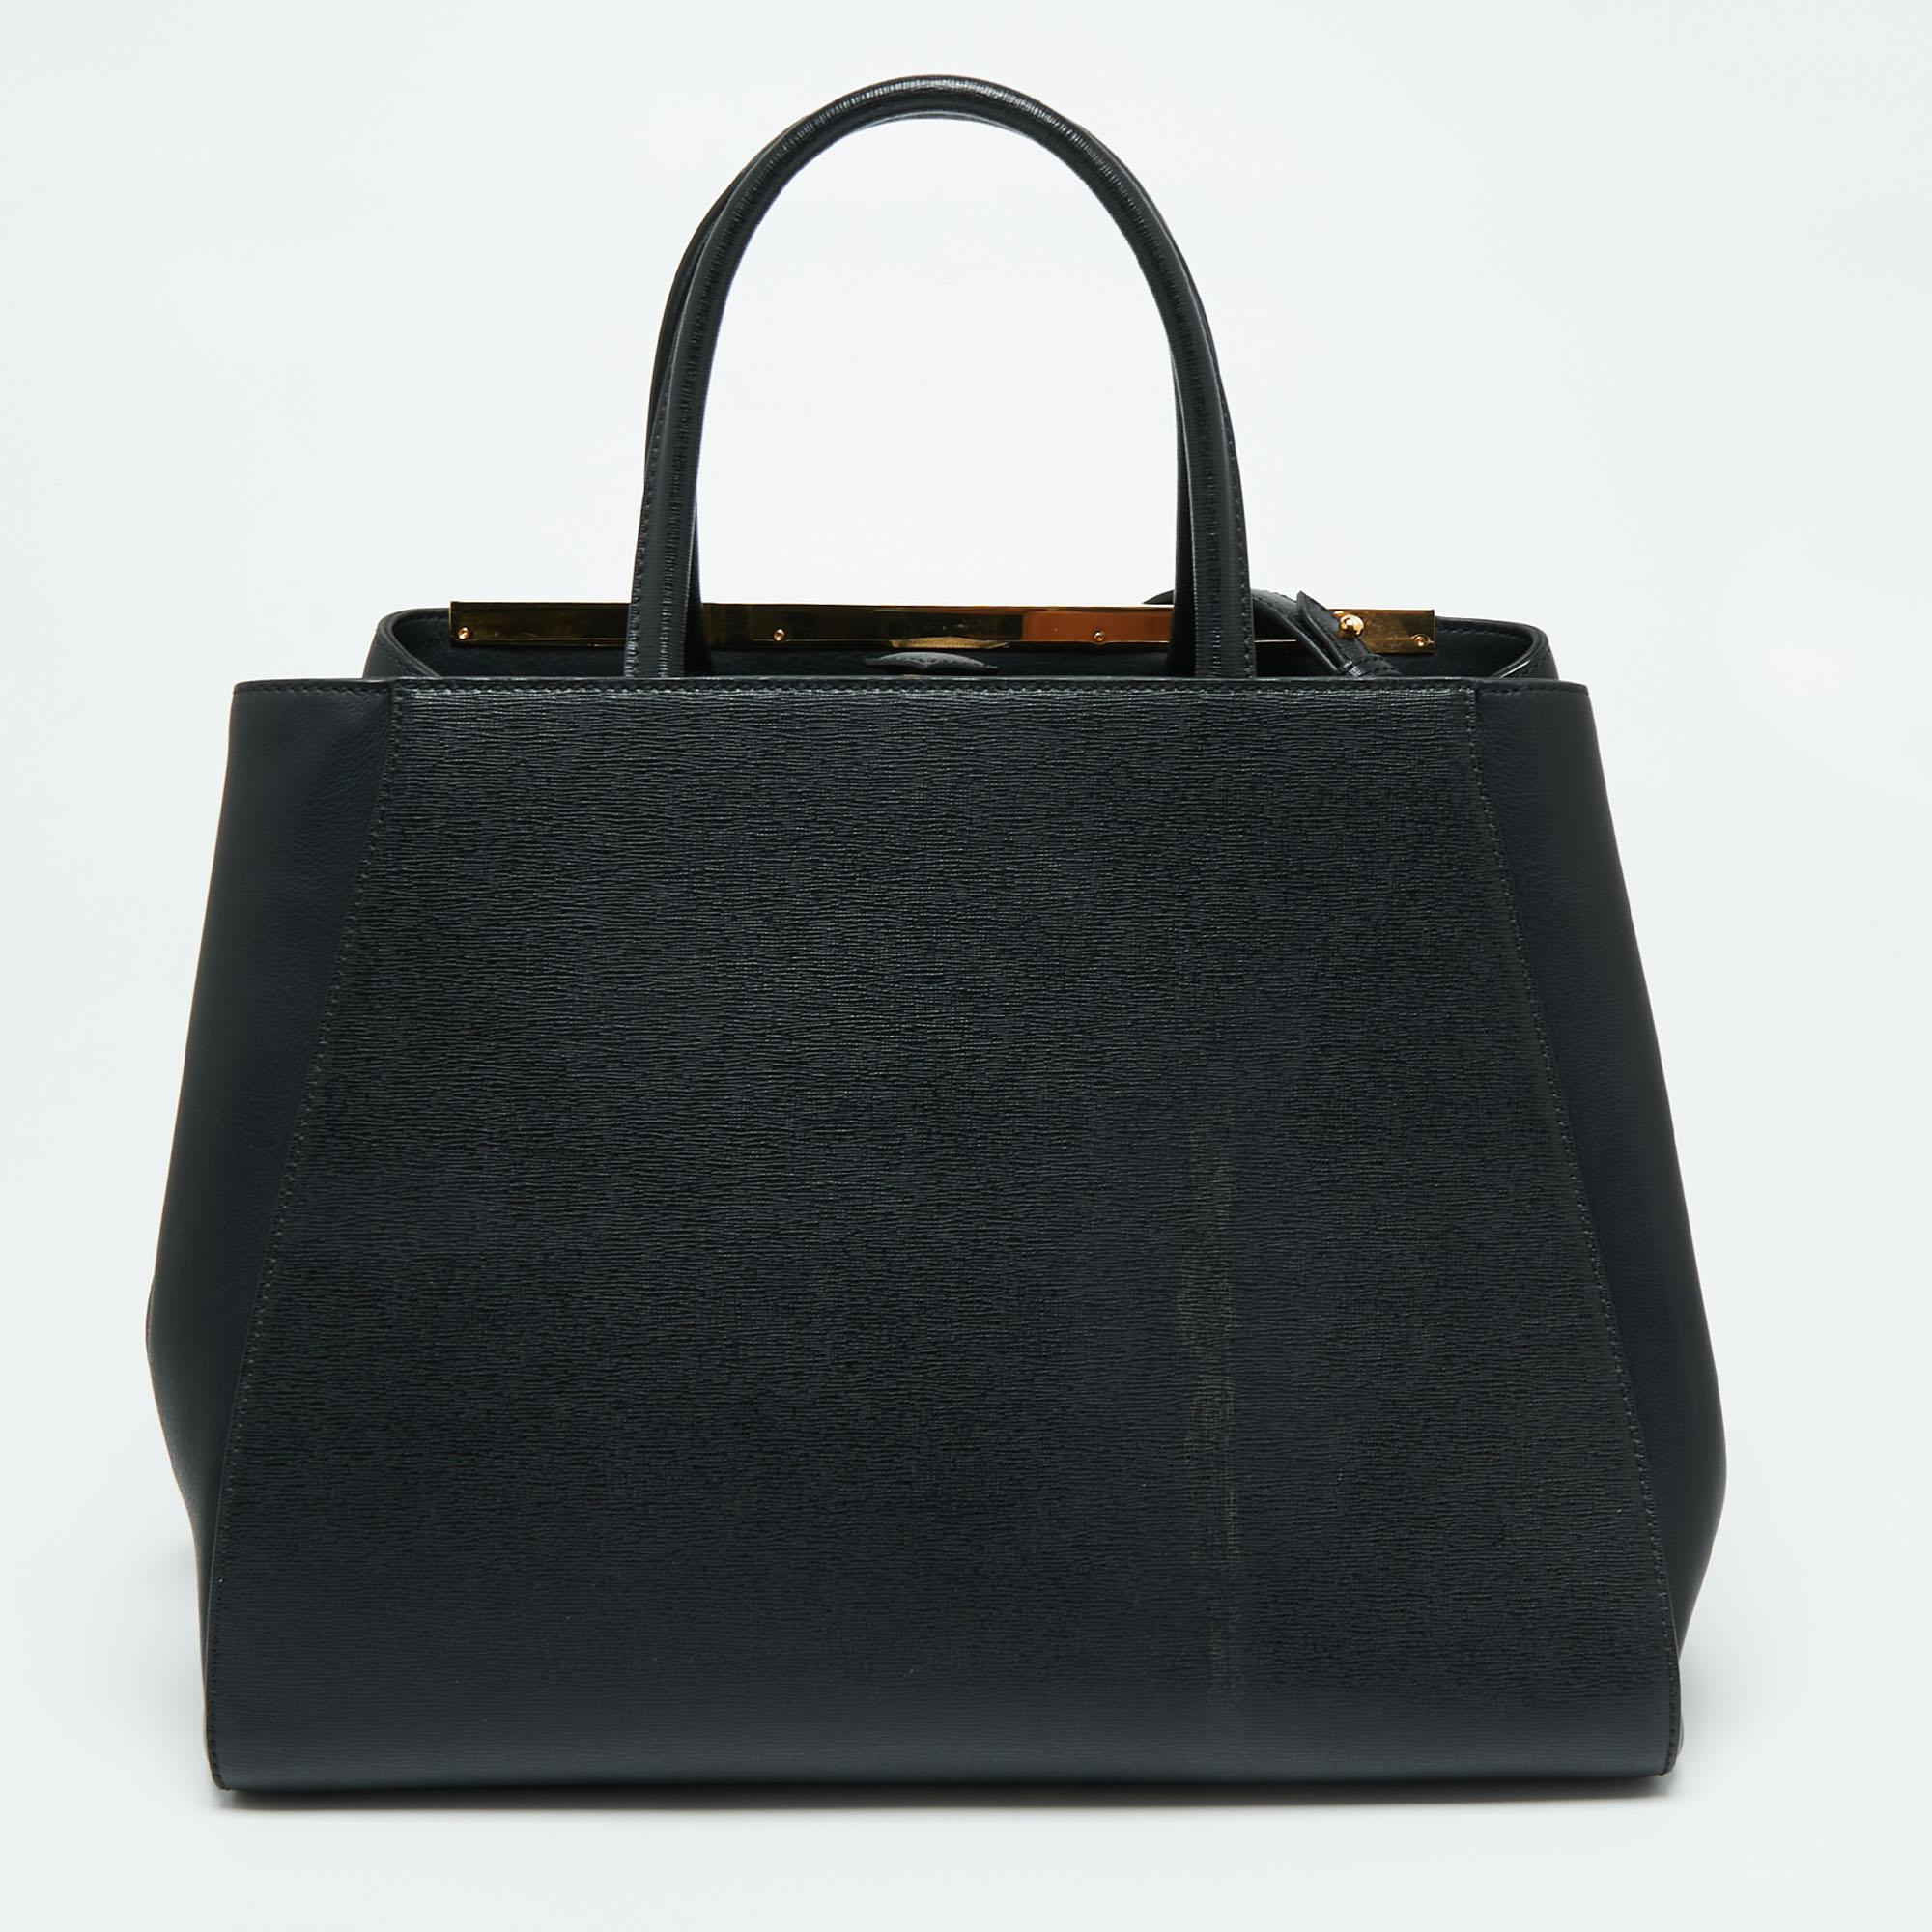 Fendi's 2Jours tote is one of the most iconic designs from the label and it still continues to receive the love of women around the world. Crafted from black leather, the bag features double handles and a strap. It is equipped with a fabric interior